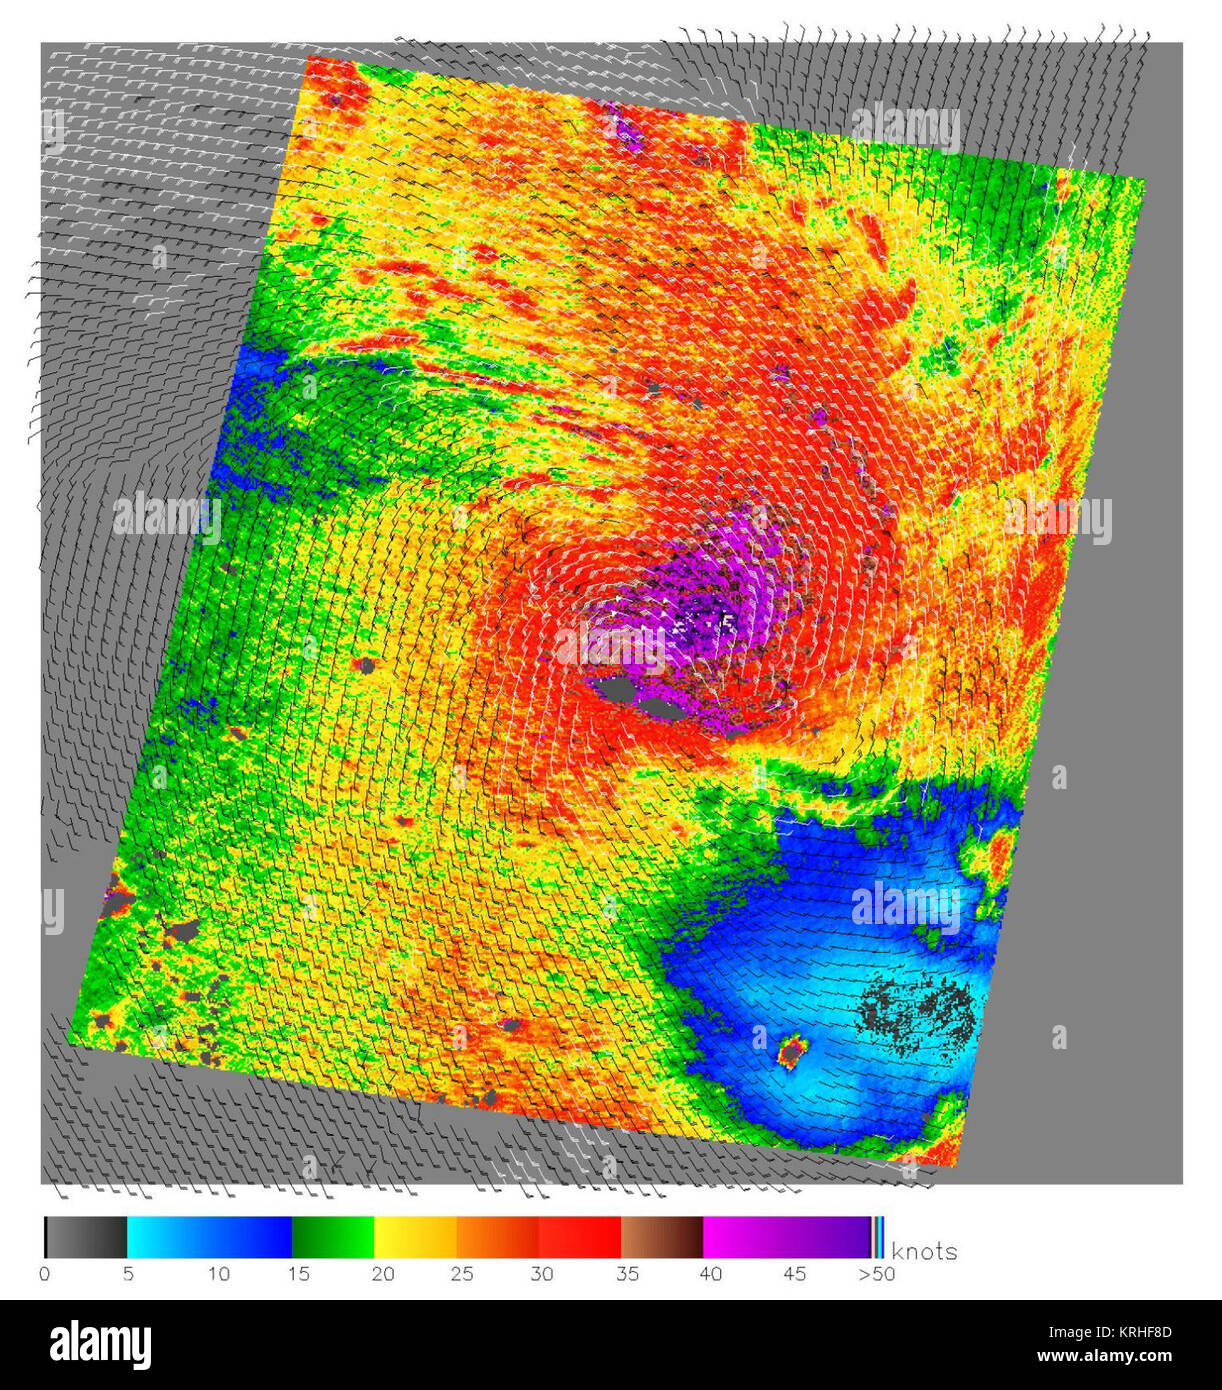 The SeaWinds scatterometer aboard NASA's QuikScat satellite collected the data used to create this colorful image of Cyclone Olaf churning in the South Pacific on February 16, 2005. The colored background shows the near-surface wind speeds at 2.5-kilometer resolution. The strongest winds, shown in purple, are at the center of the storm, with gradually weakening winds forming rings around the center. The black barbs indicate wind speed and direction at QuikScat's nominal, 25-kilometer resolution; white barbs indicate areas of heavy rain.   QuikScat Background  NASA's Quick Scatterometer (QuikSc Stock Photo